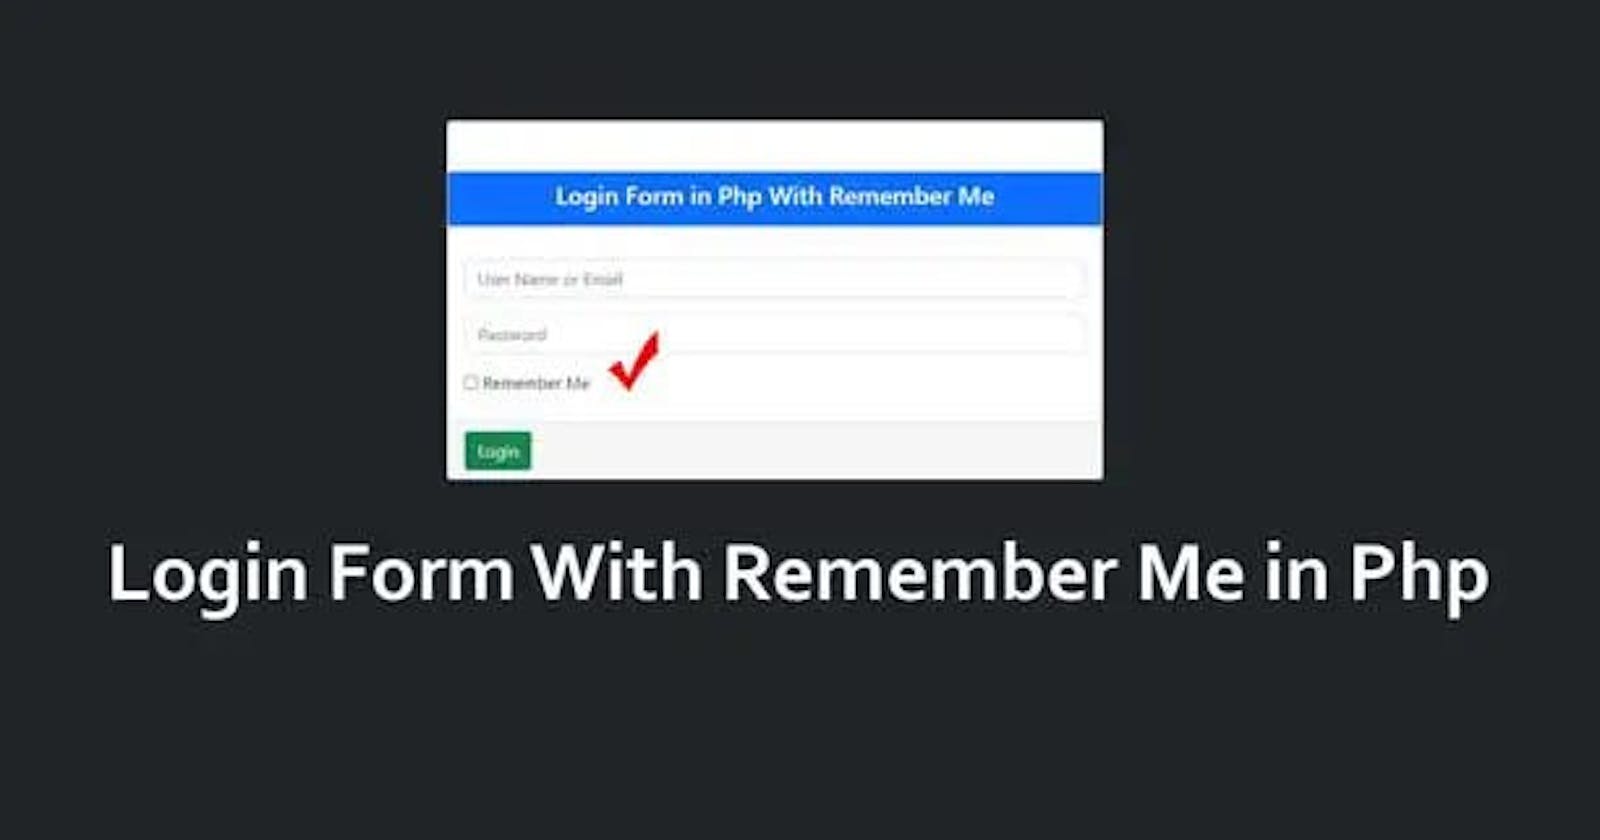 Login Form With Remember Me in Php